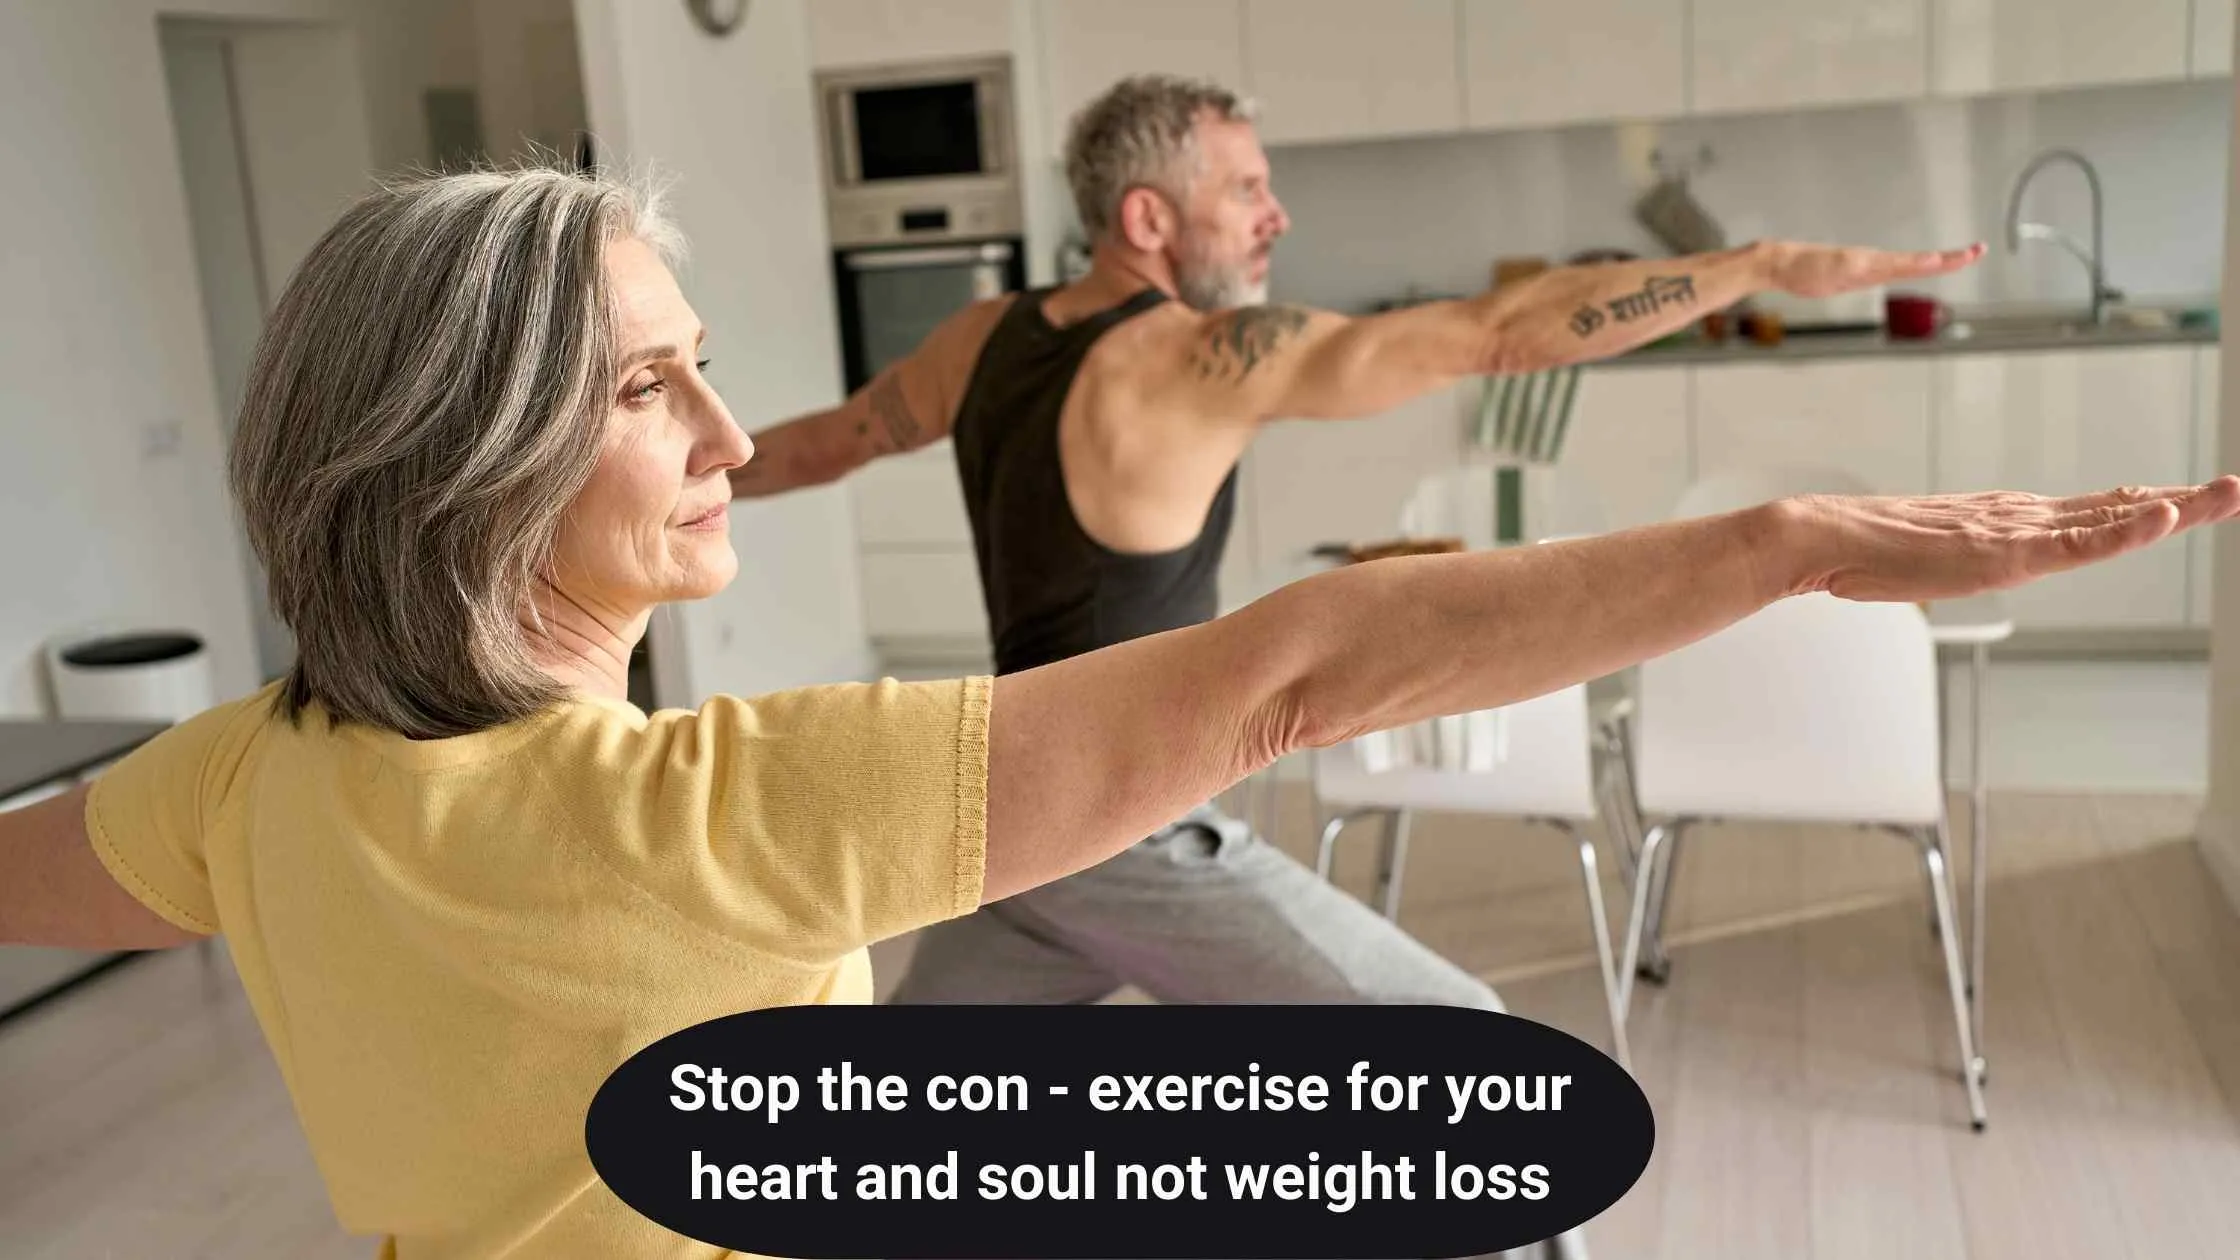 A photo of an older man and woman doing yoga. There is text on the image, reading "Stop the con - exercise for your heart and soul not weight loss."